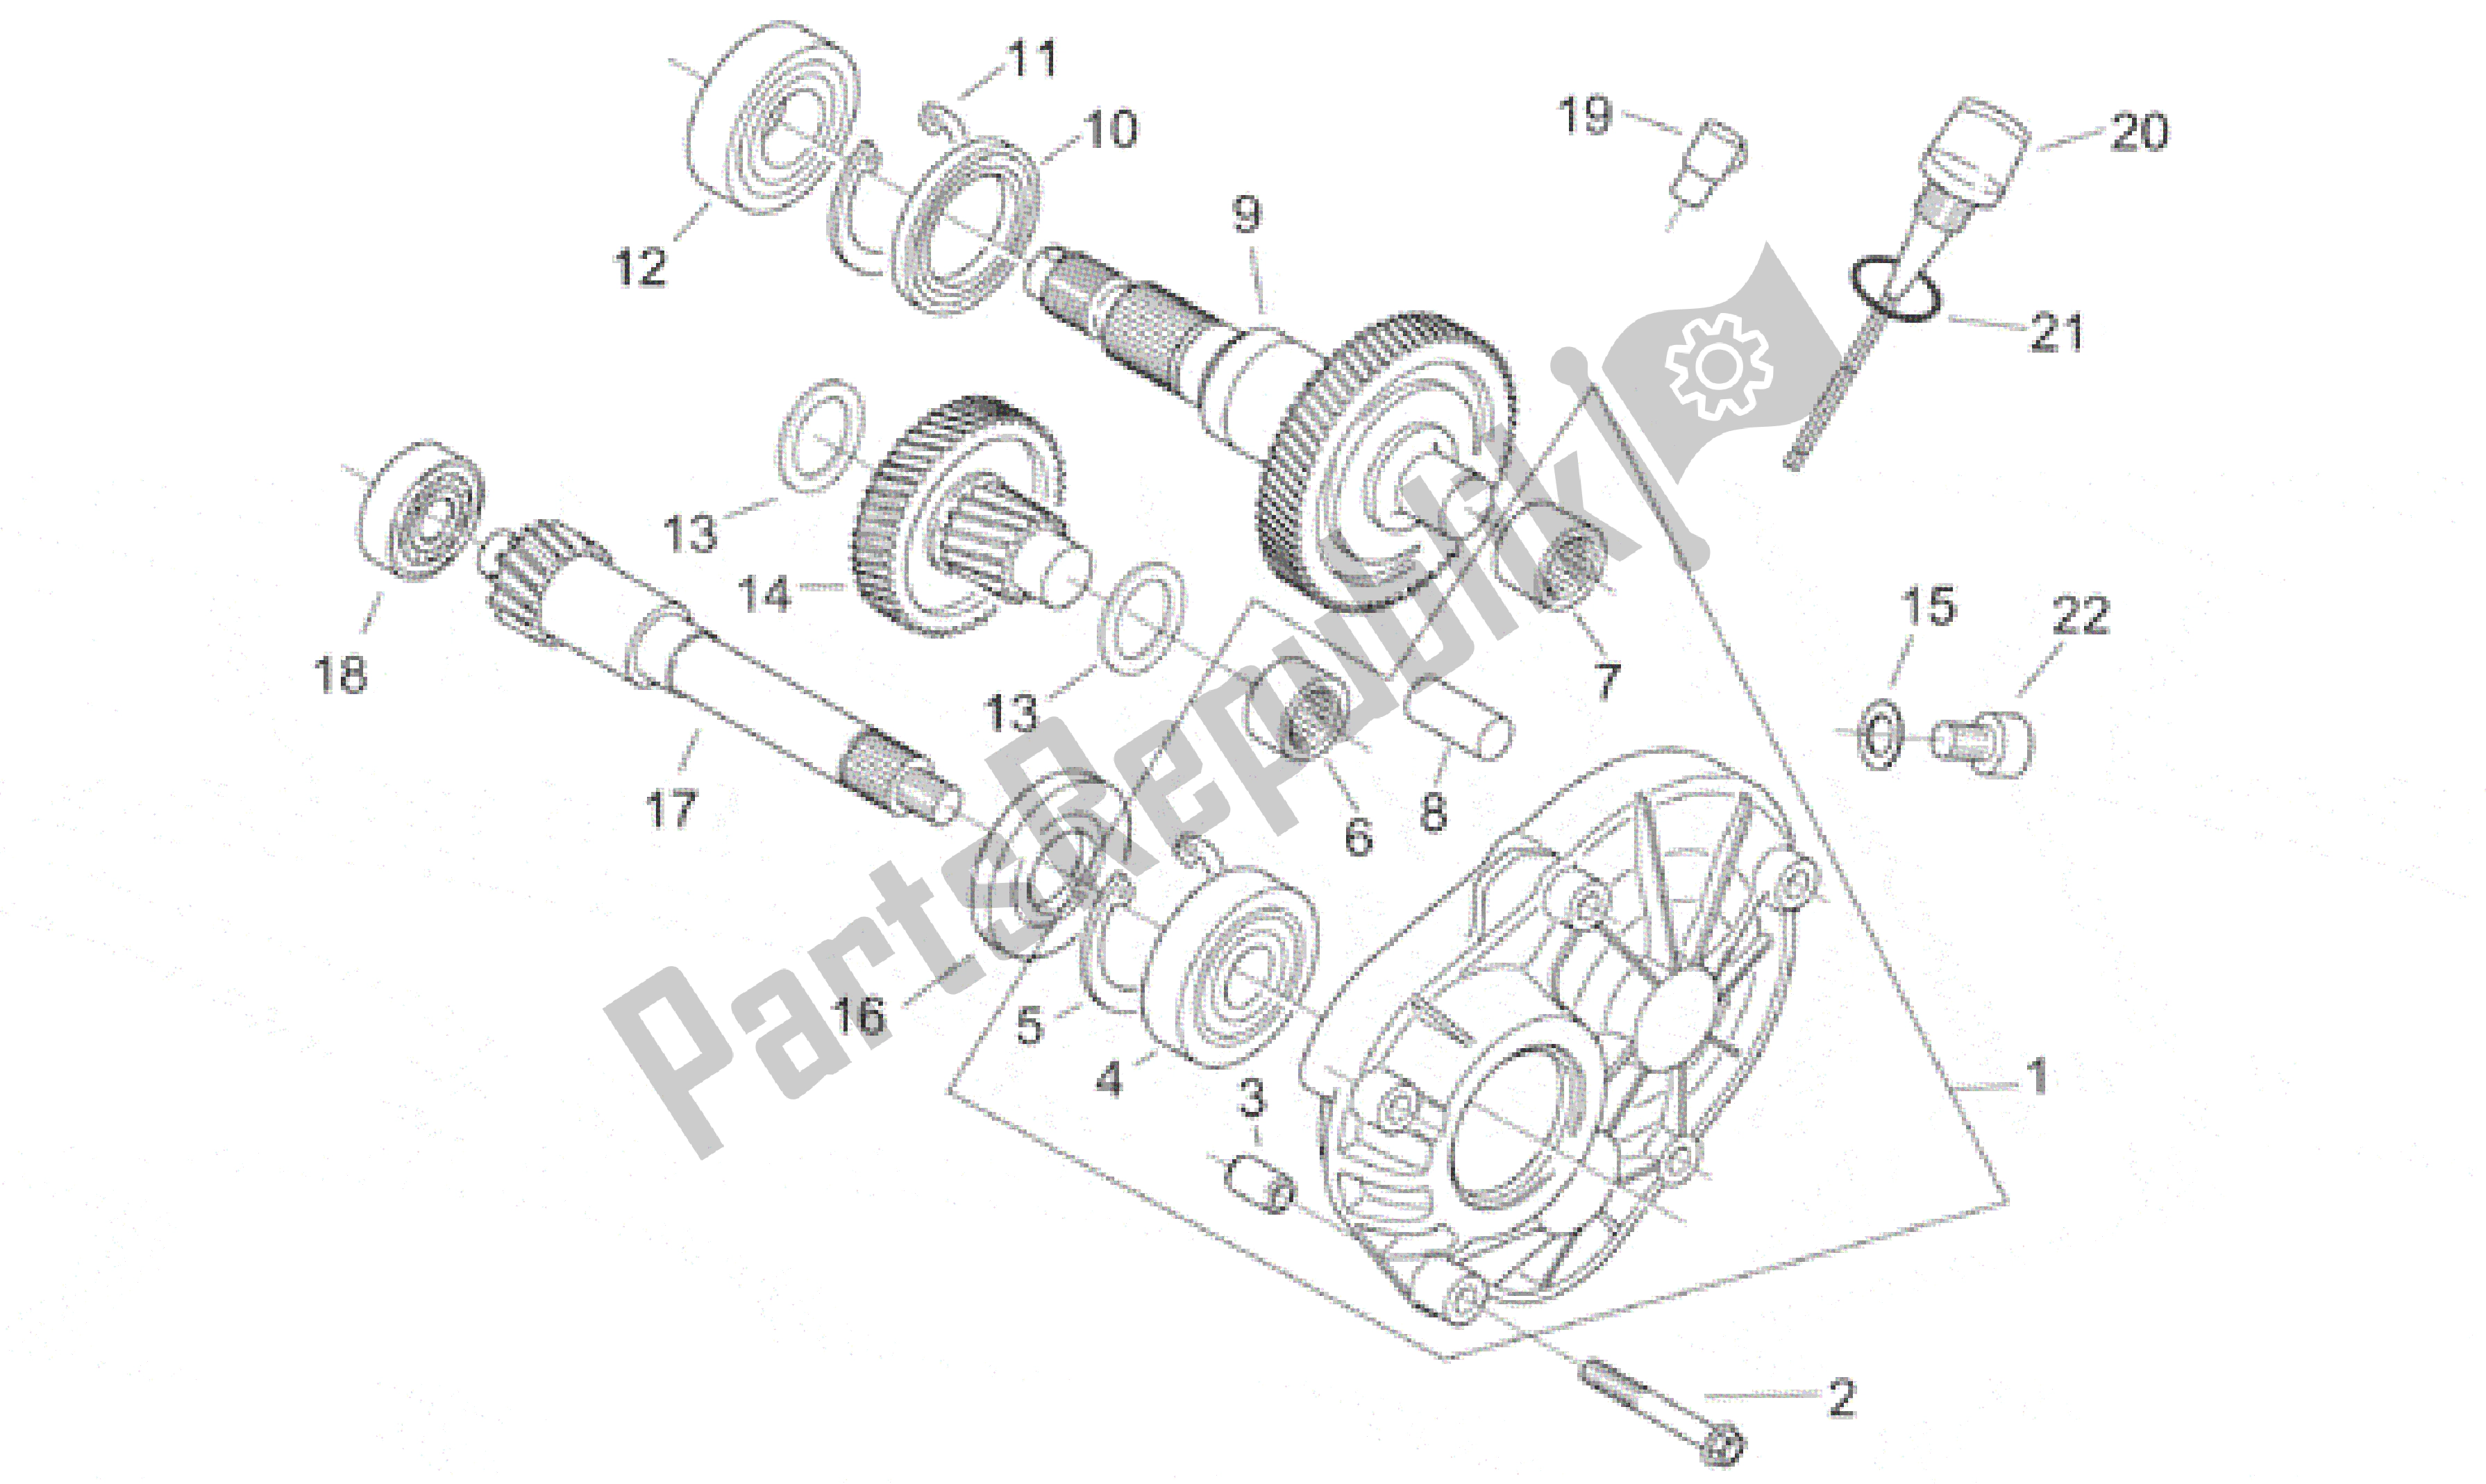 All parts for the Transmission Final Drive of the Aprilia Habana 125 1999 - 2001